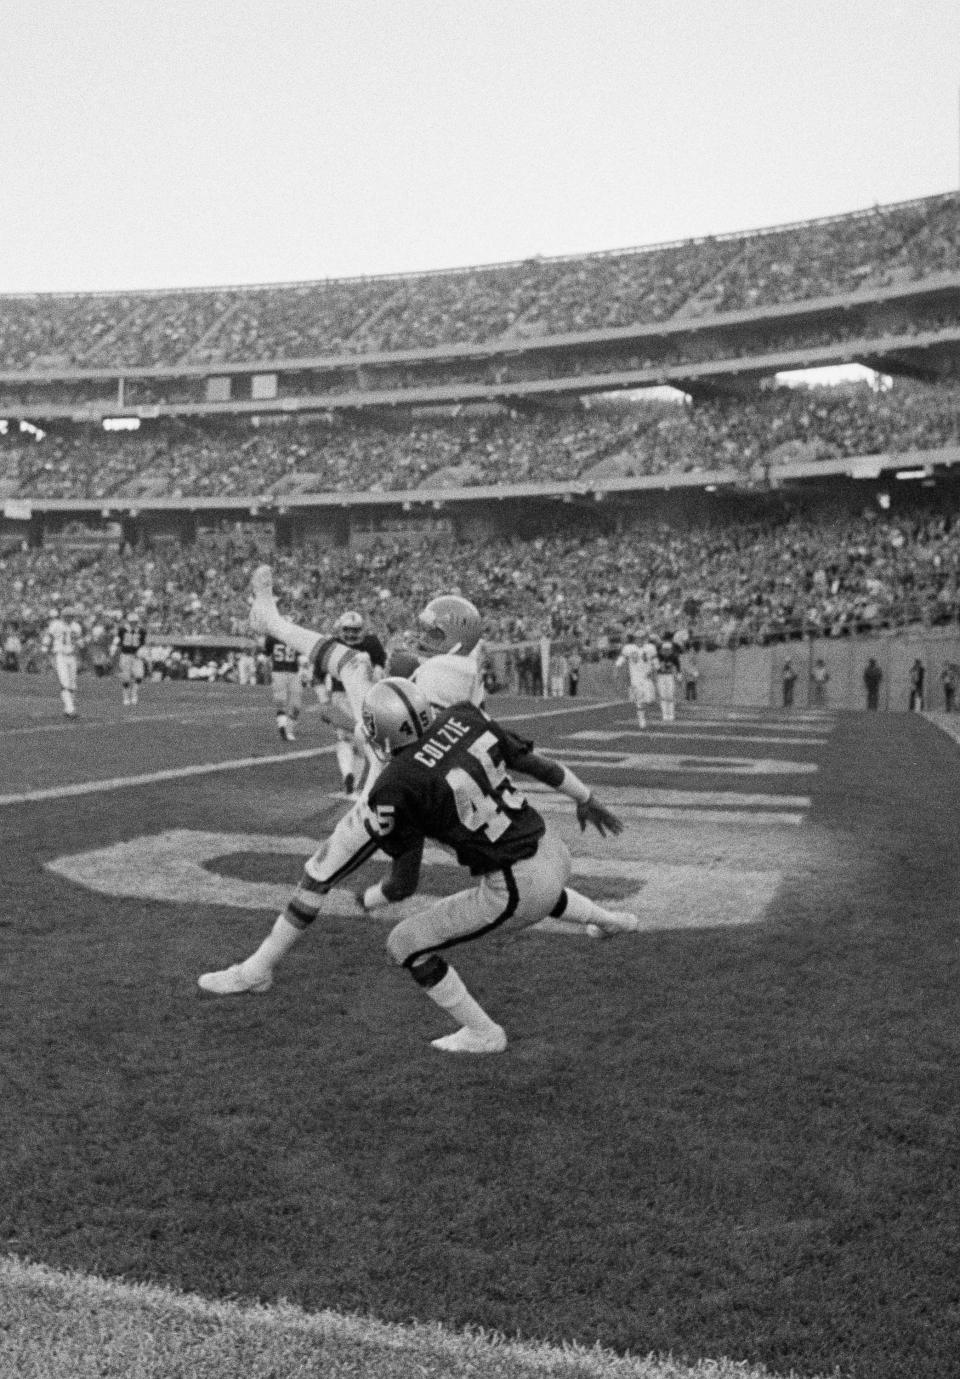 Isaac Curtis of the Cincinnati Bengals gathers in a touchdown pass from quarterback Ken Anderson in the fourth quarter of the AFC Playoff at Oakland, Dec. 28, 1975. The touchdown made the score: Cincinnati 27, Oakland 31. That's Neal Colzie of the Raiders moving in on the receiver. Oakland won, 31-28, and meets Pittsburgh for the AFC championship.